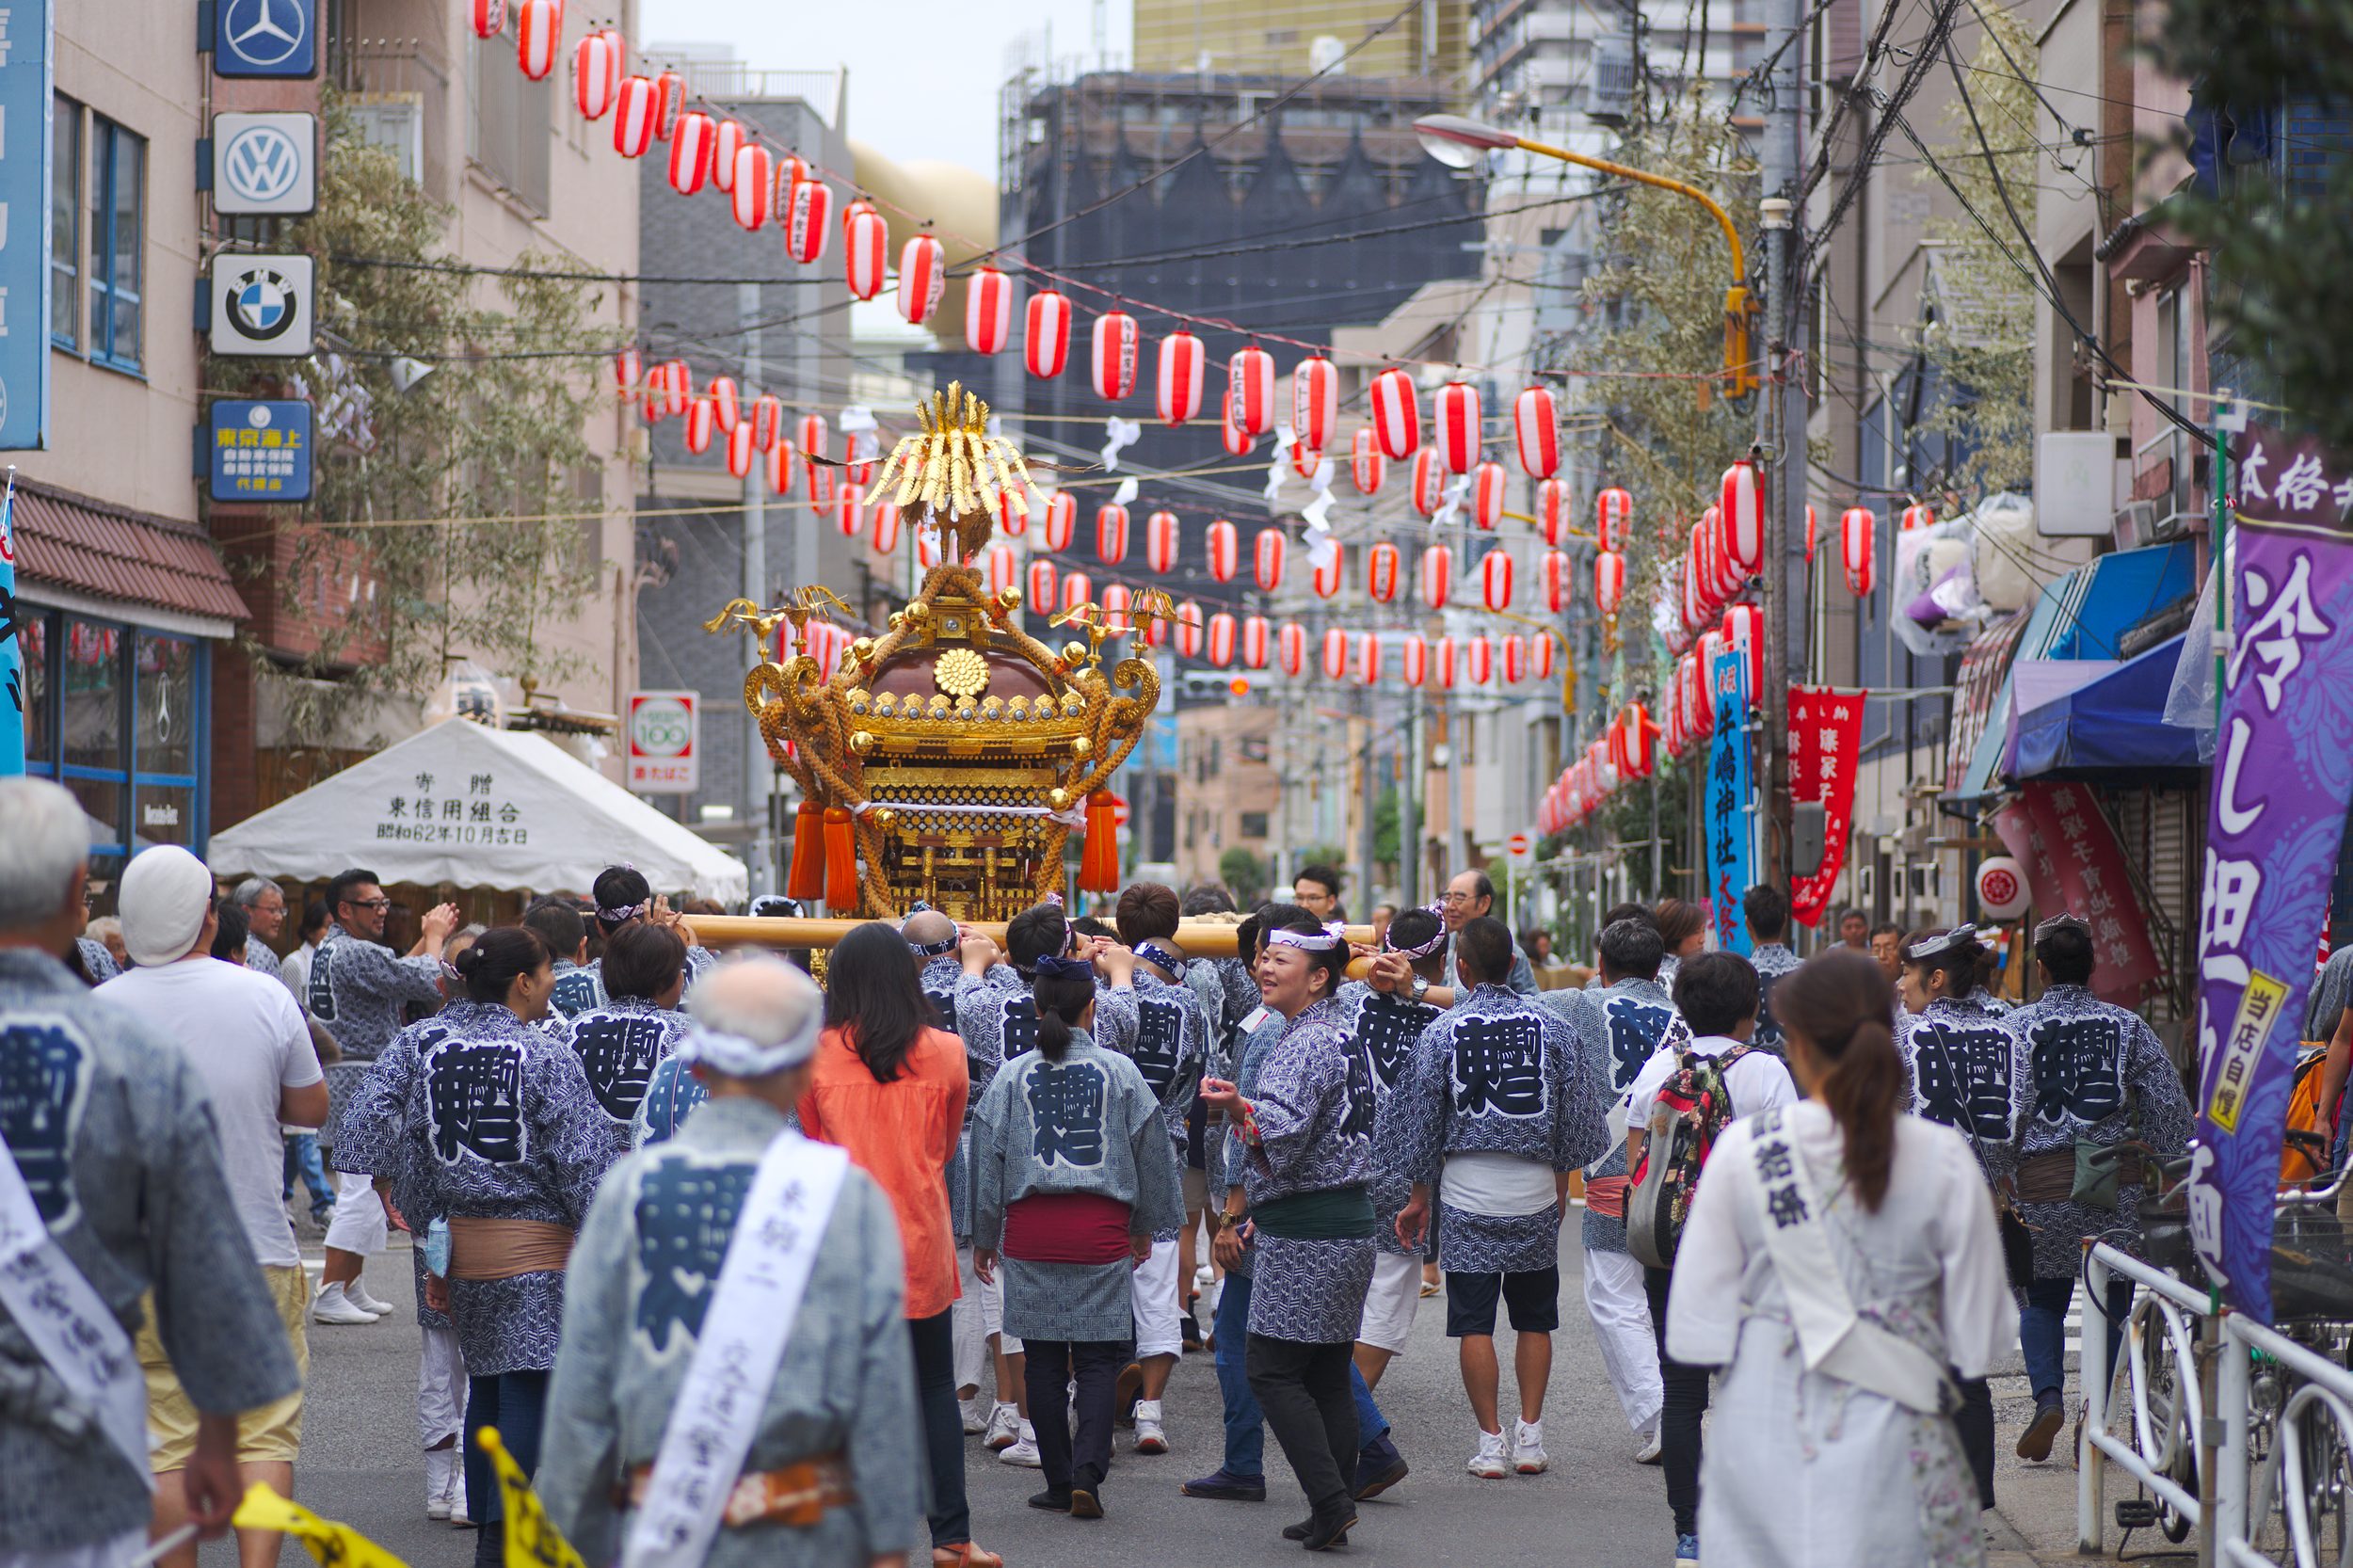 People carrying a mikoshi, red lamps hanging over them